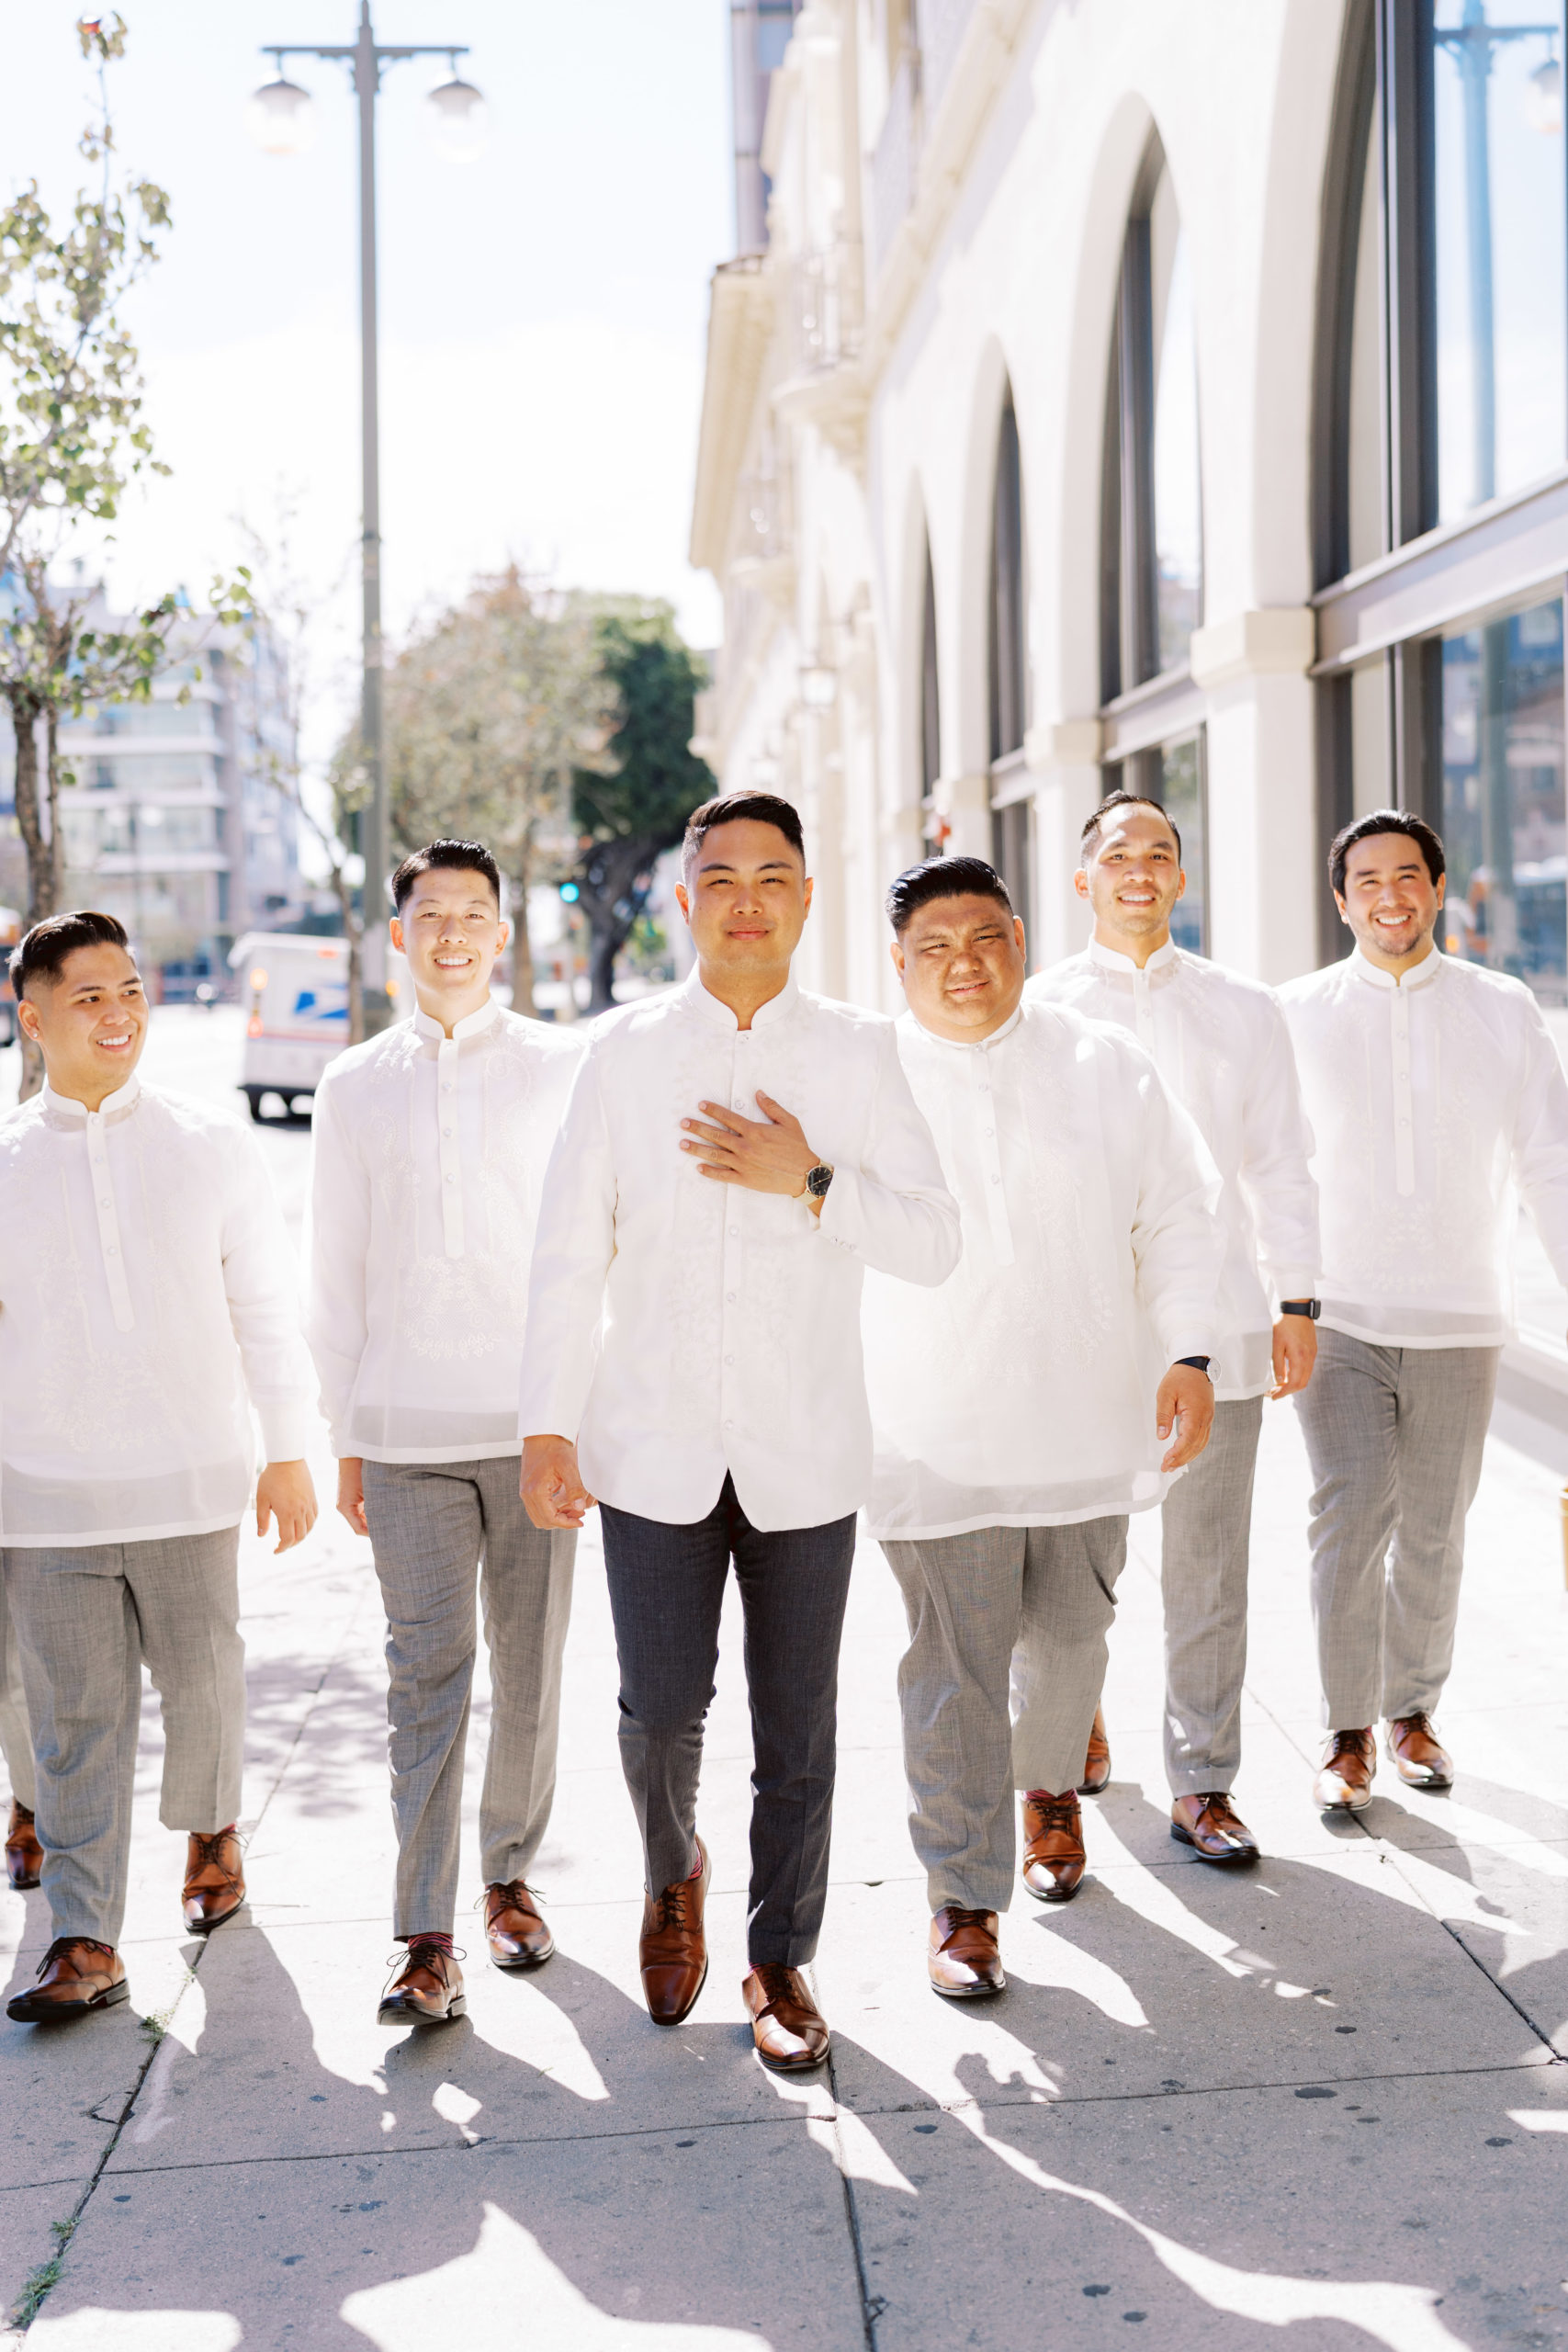 Groom with groomsmen in white traditional suits